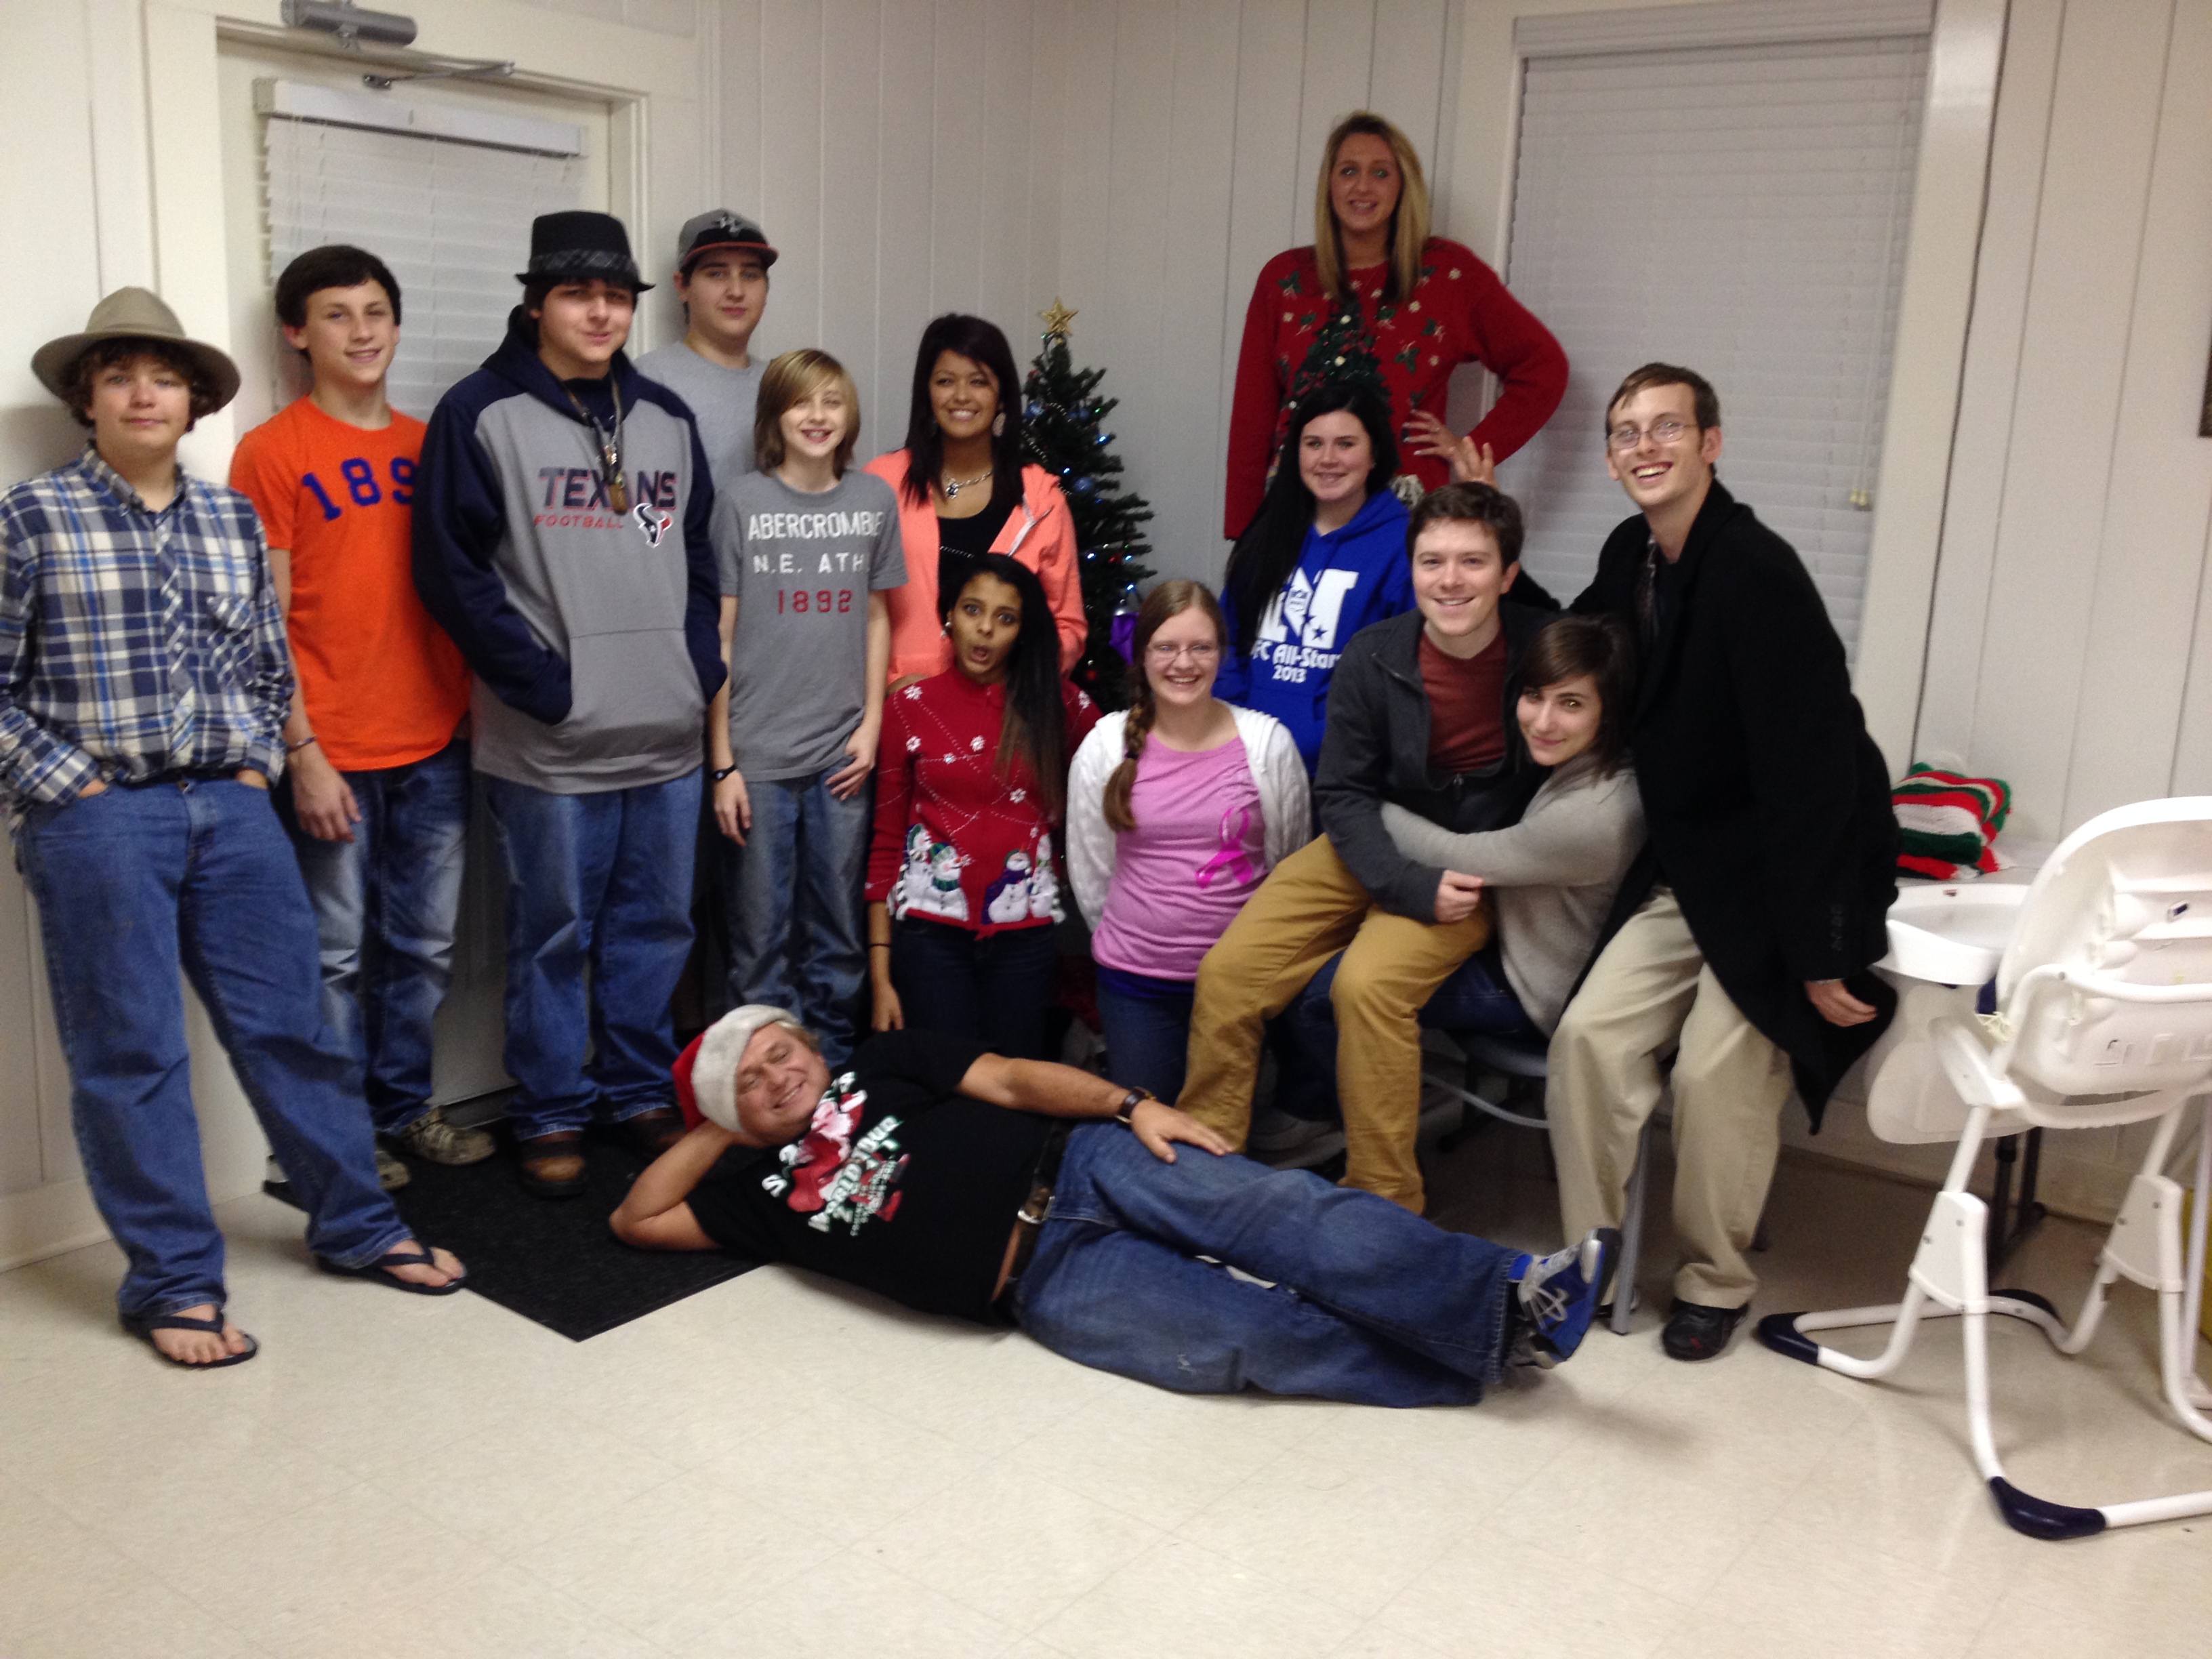 FCC YOuth Christmas 2013